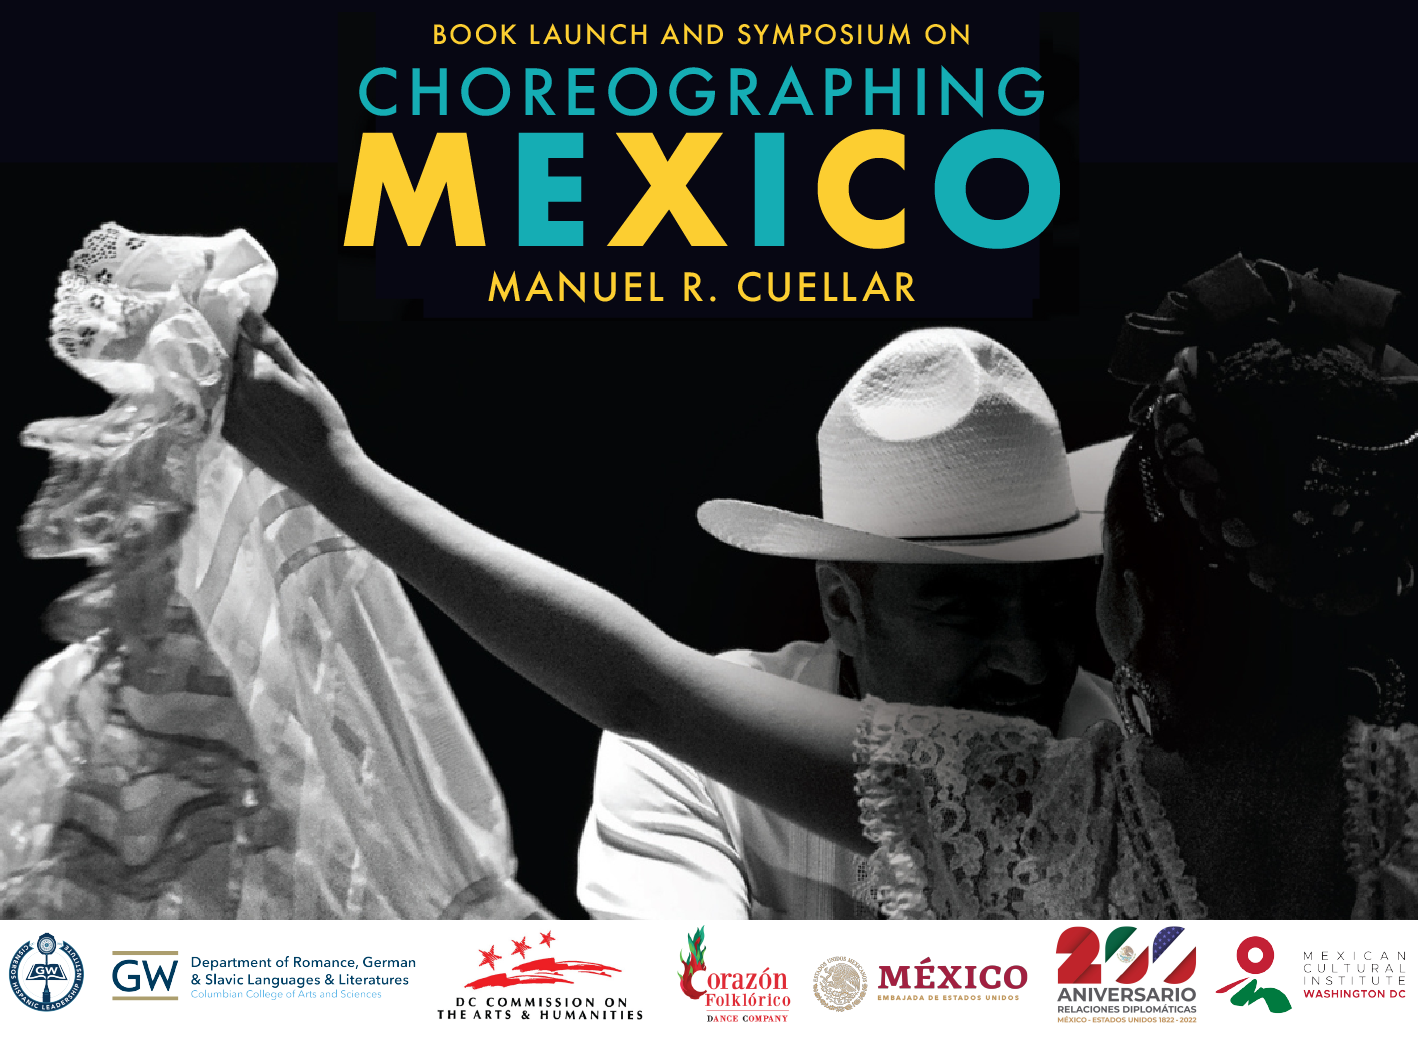 Choreographing Mexico with multiple logos at the bottom